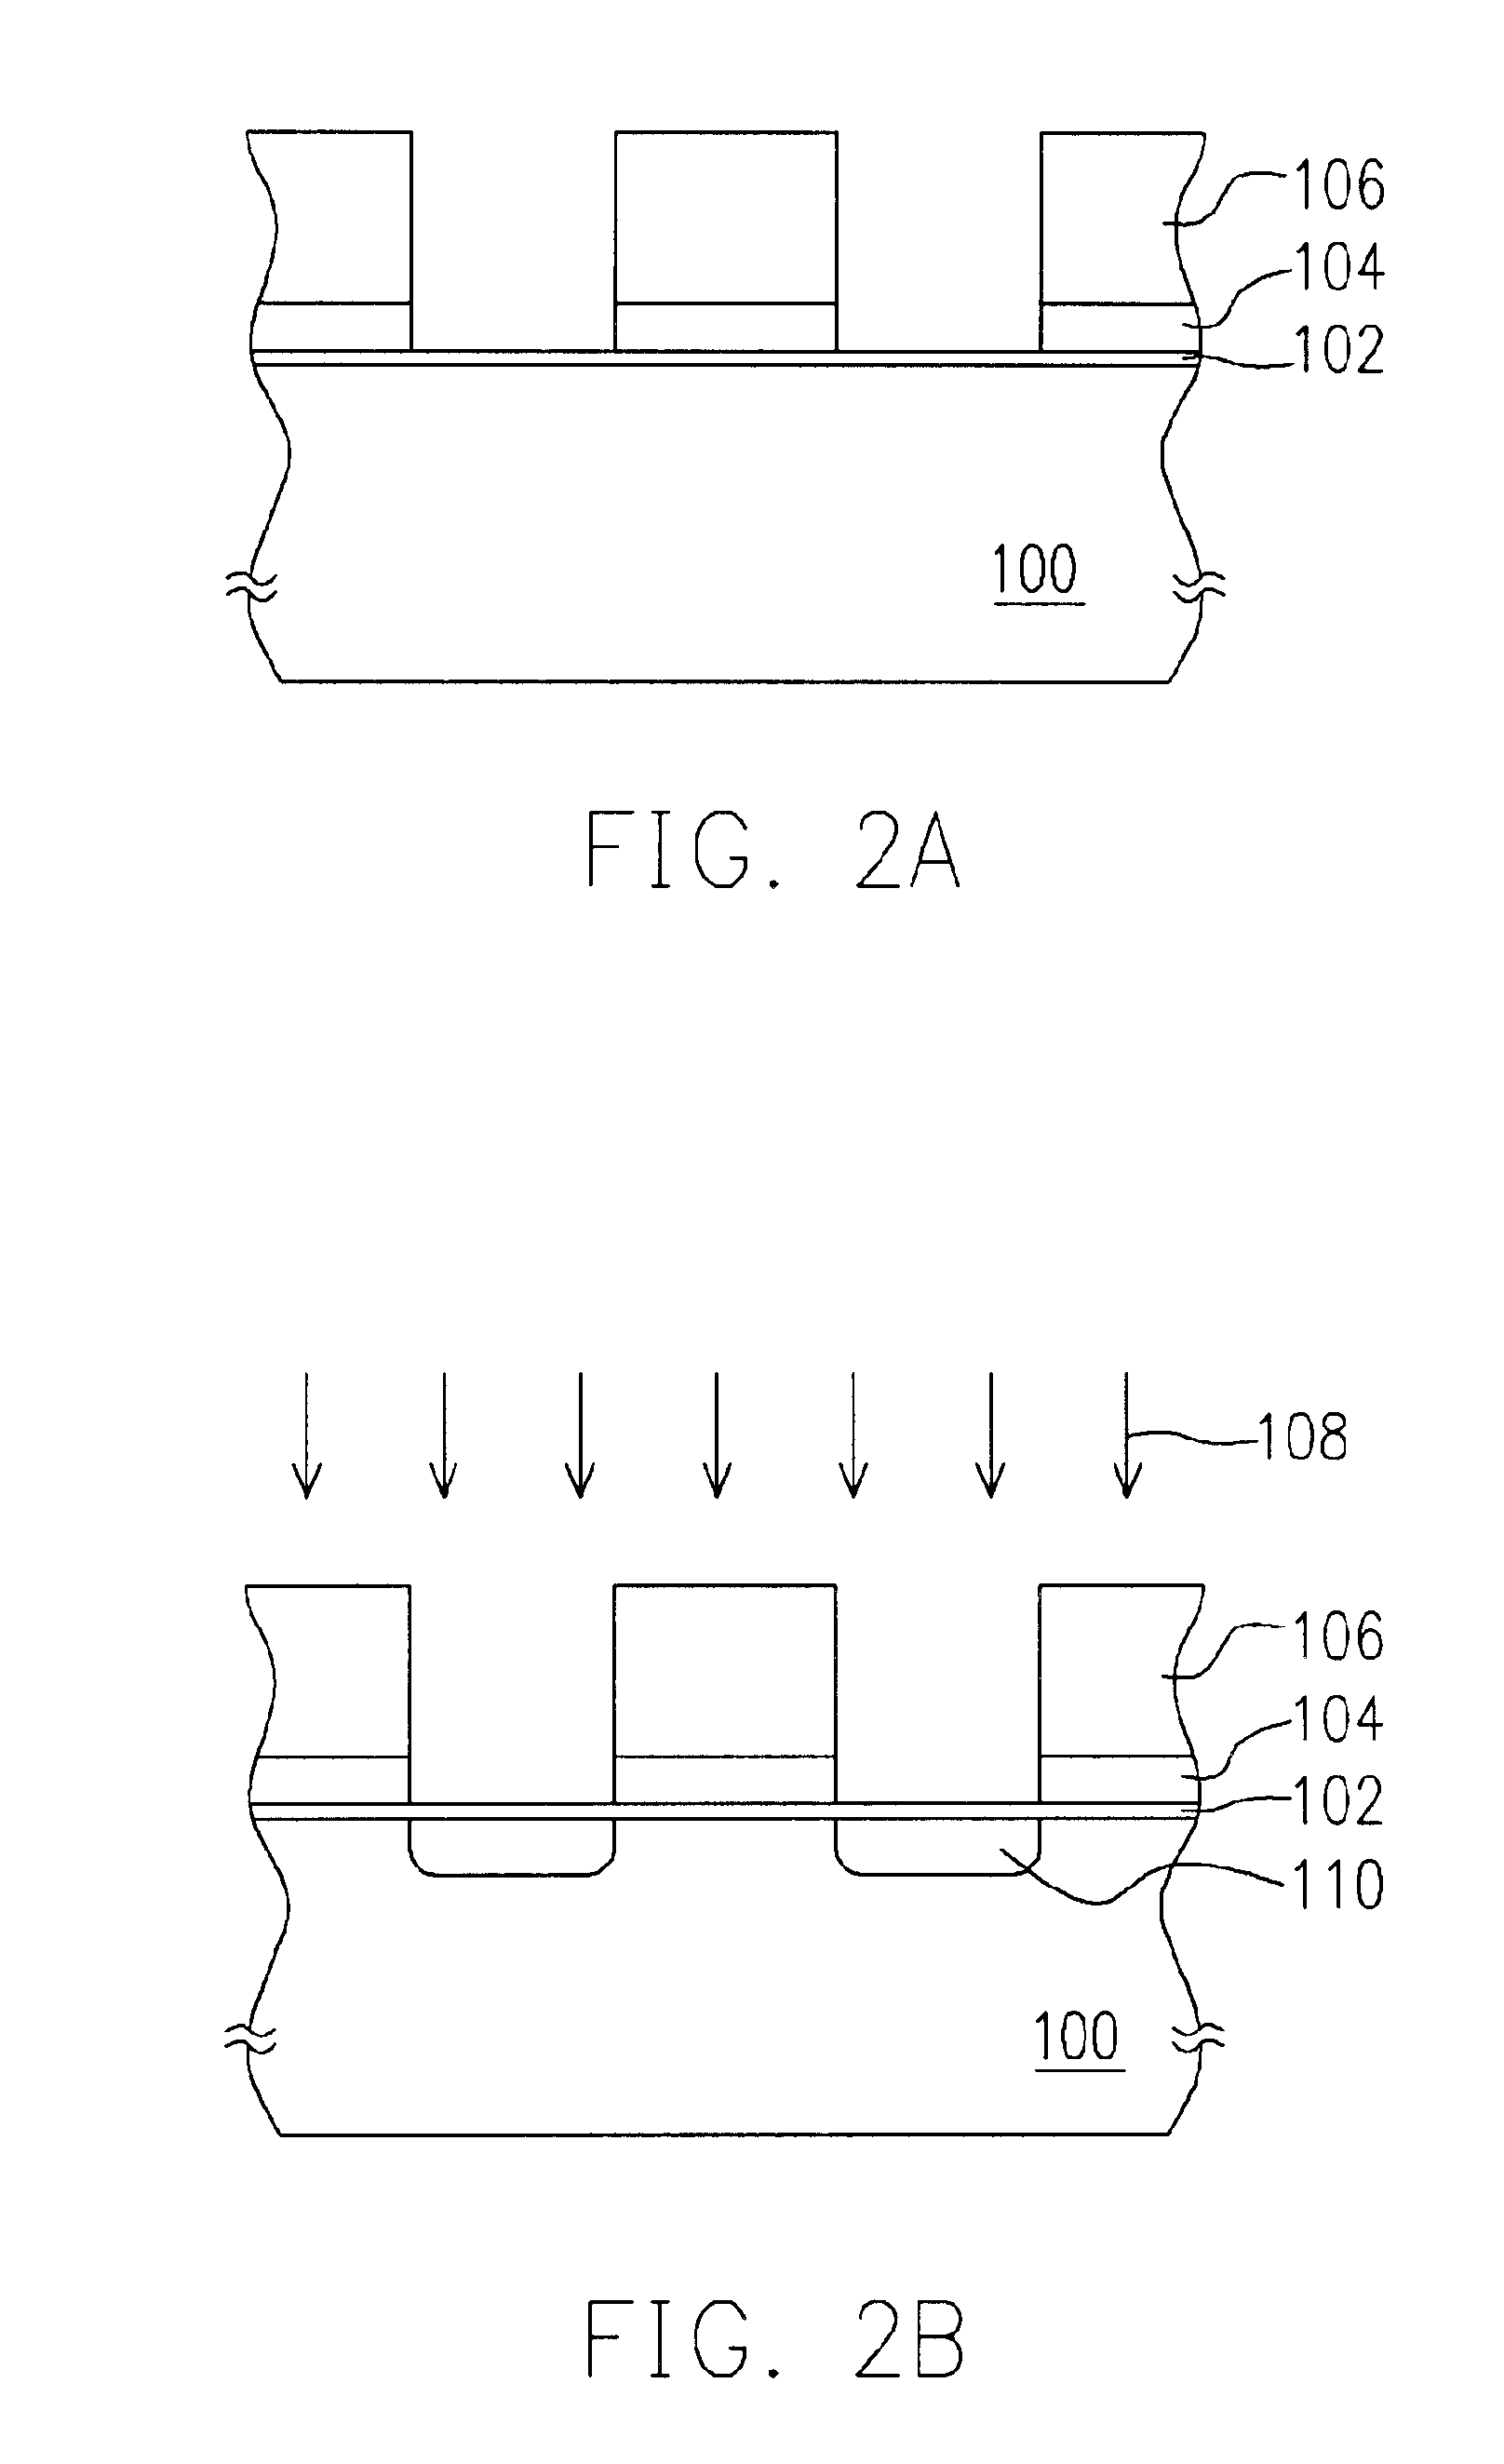 Method of improving device resistance